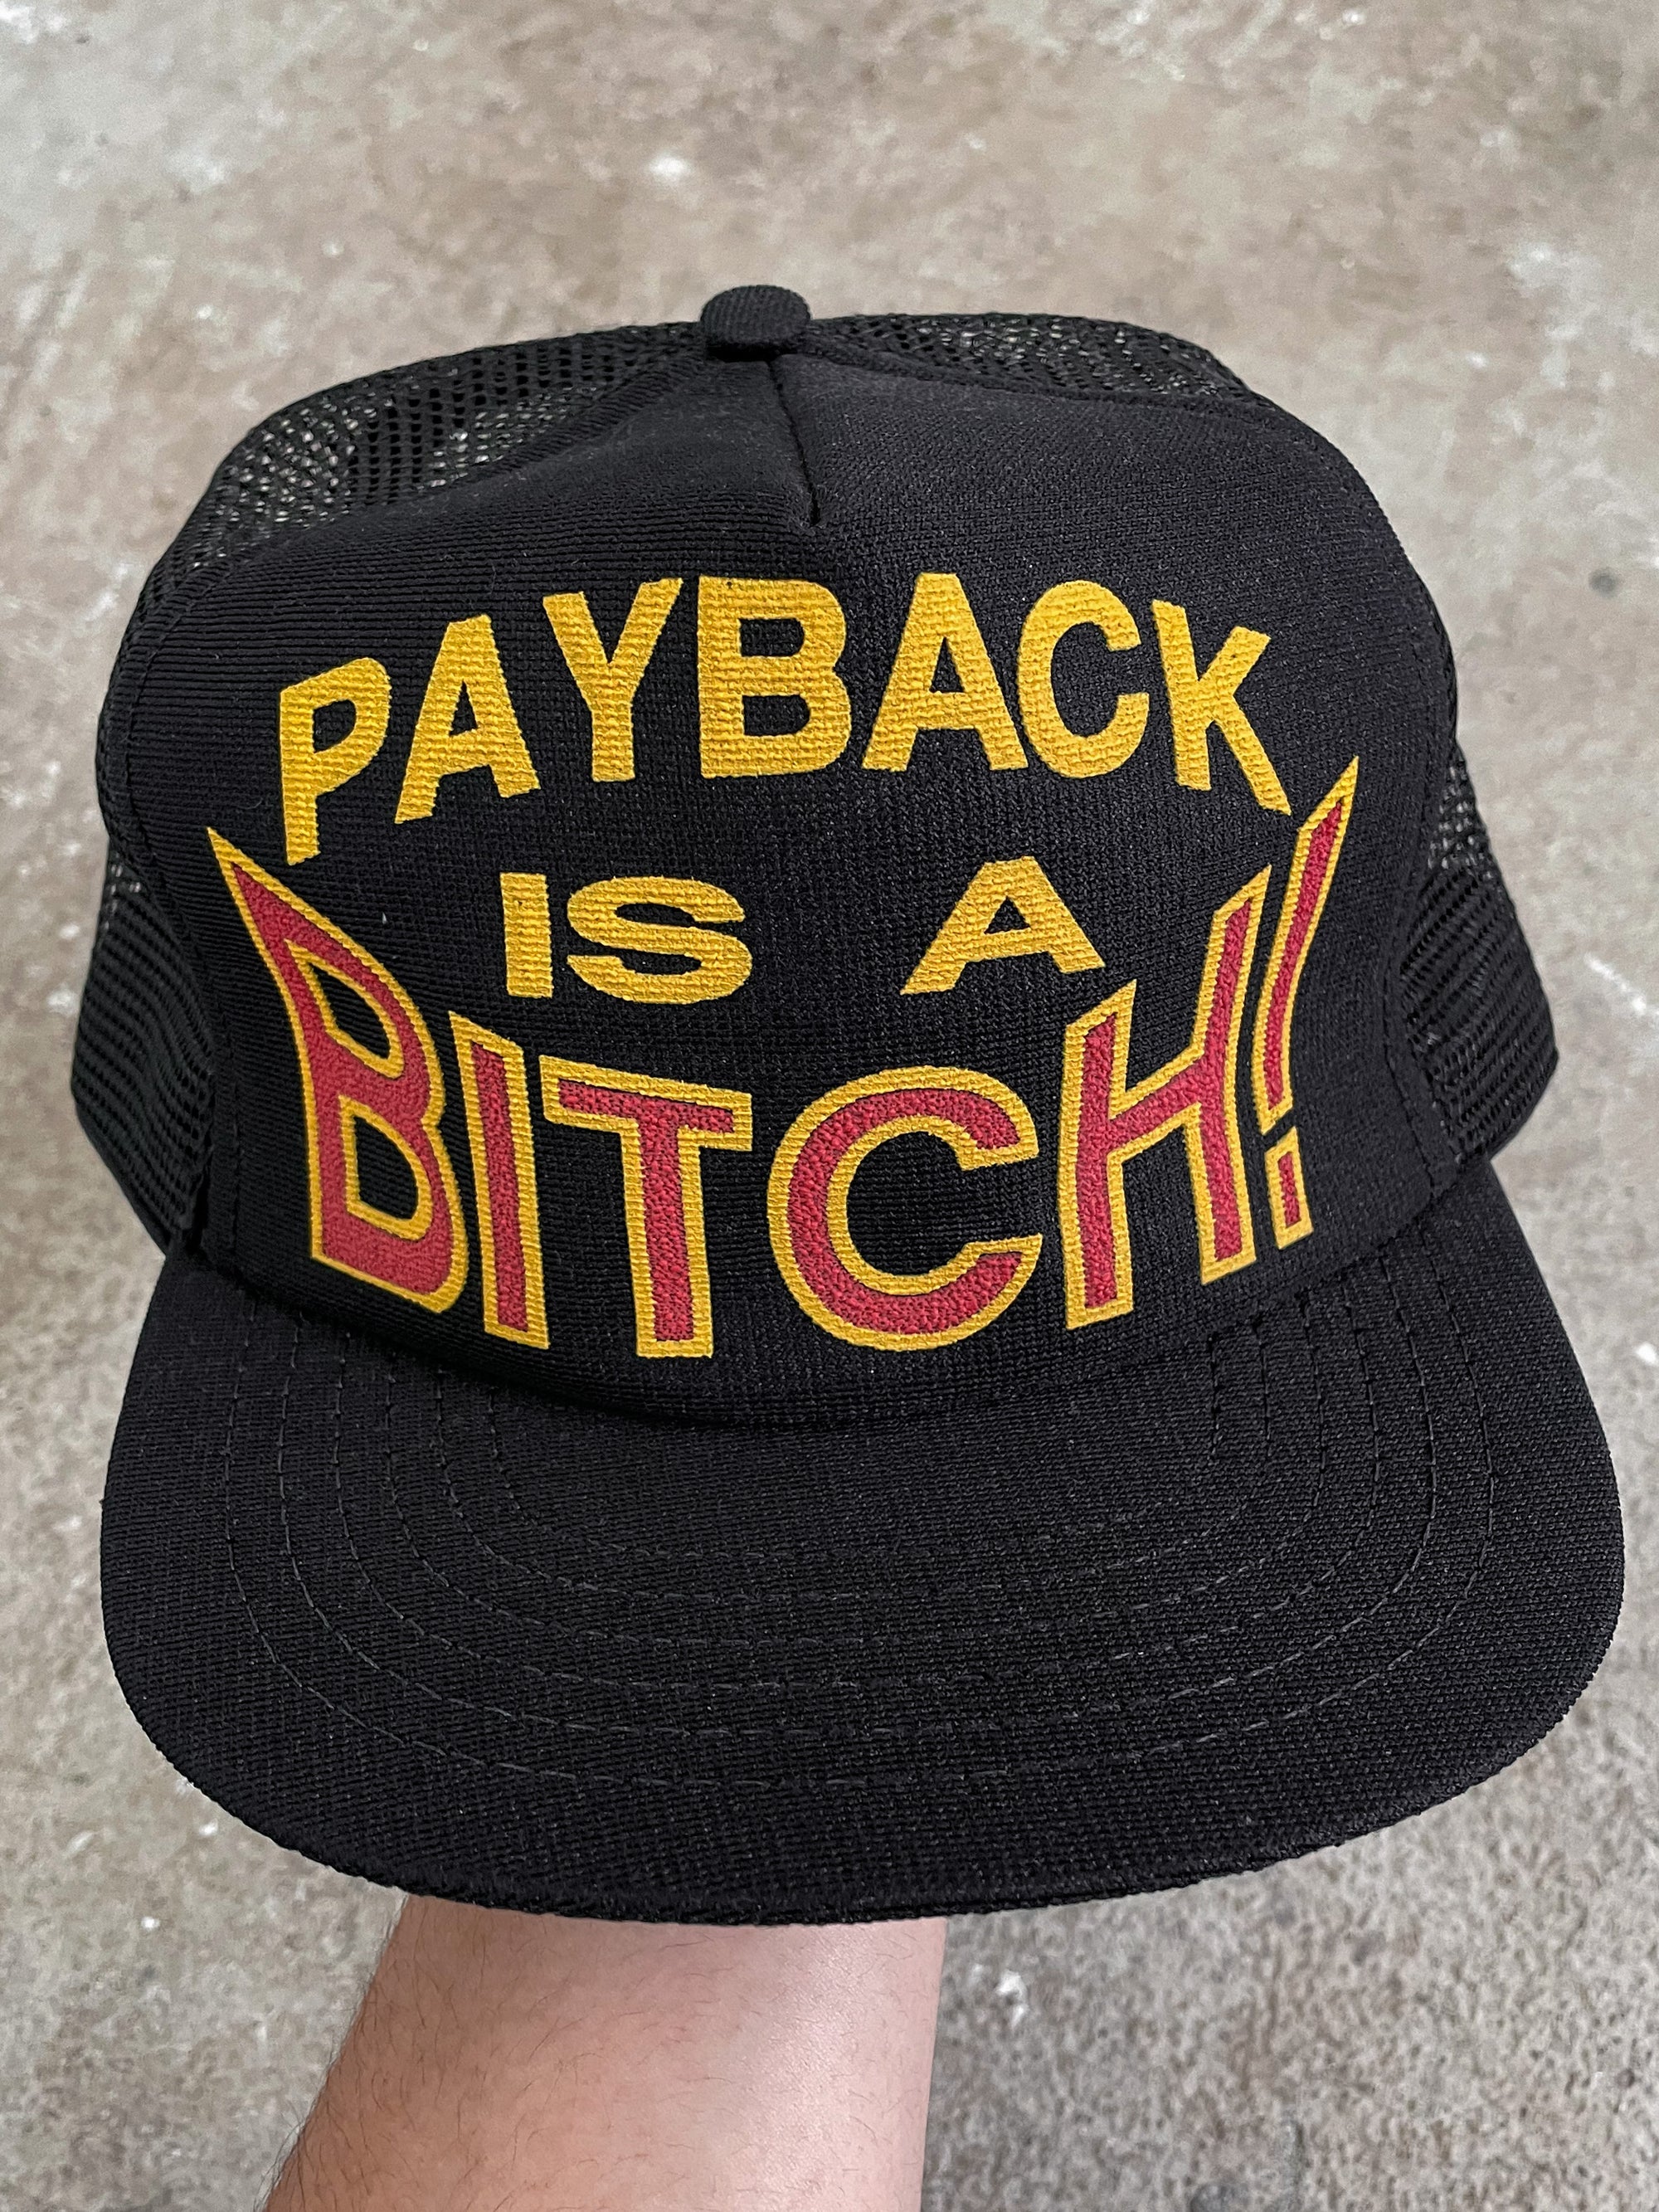 1980s “Payback Is A Bitch!” Trucker Hat